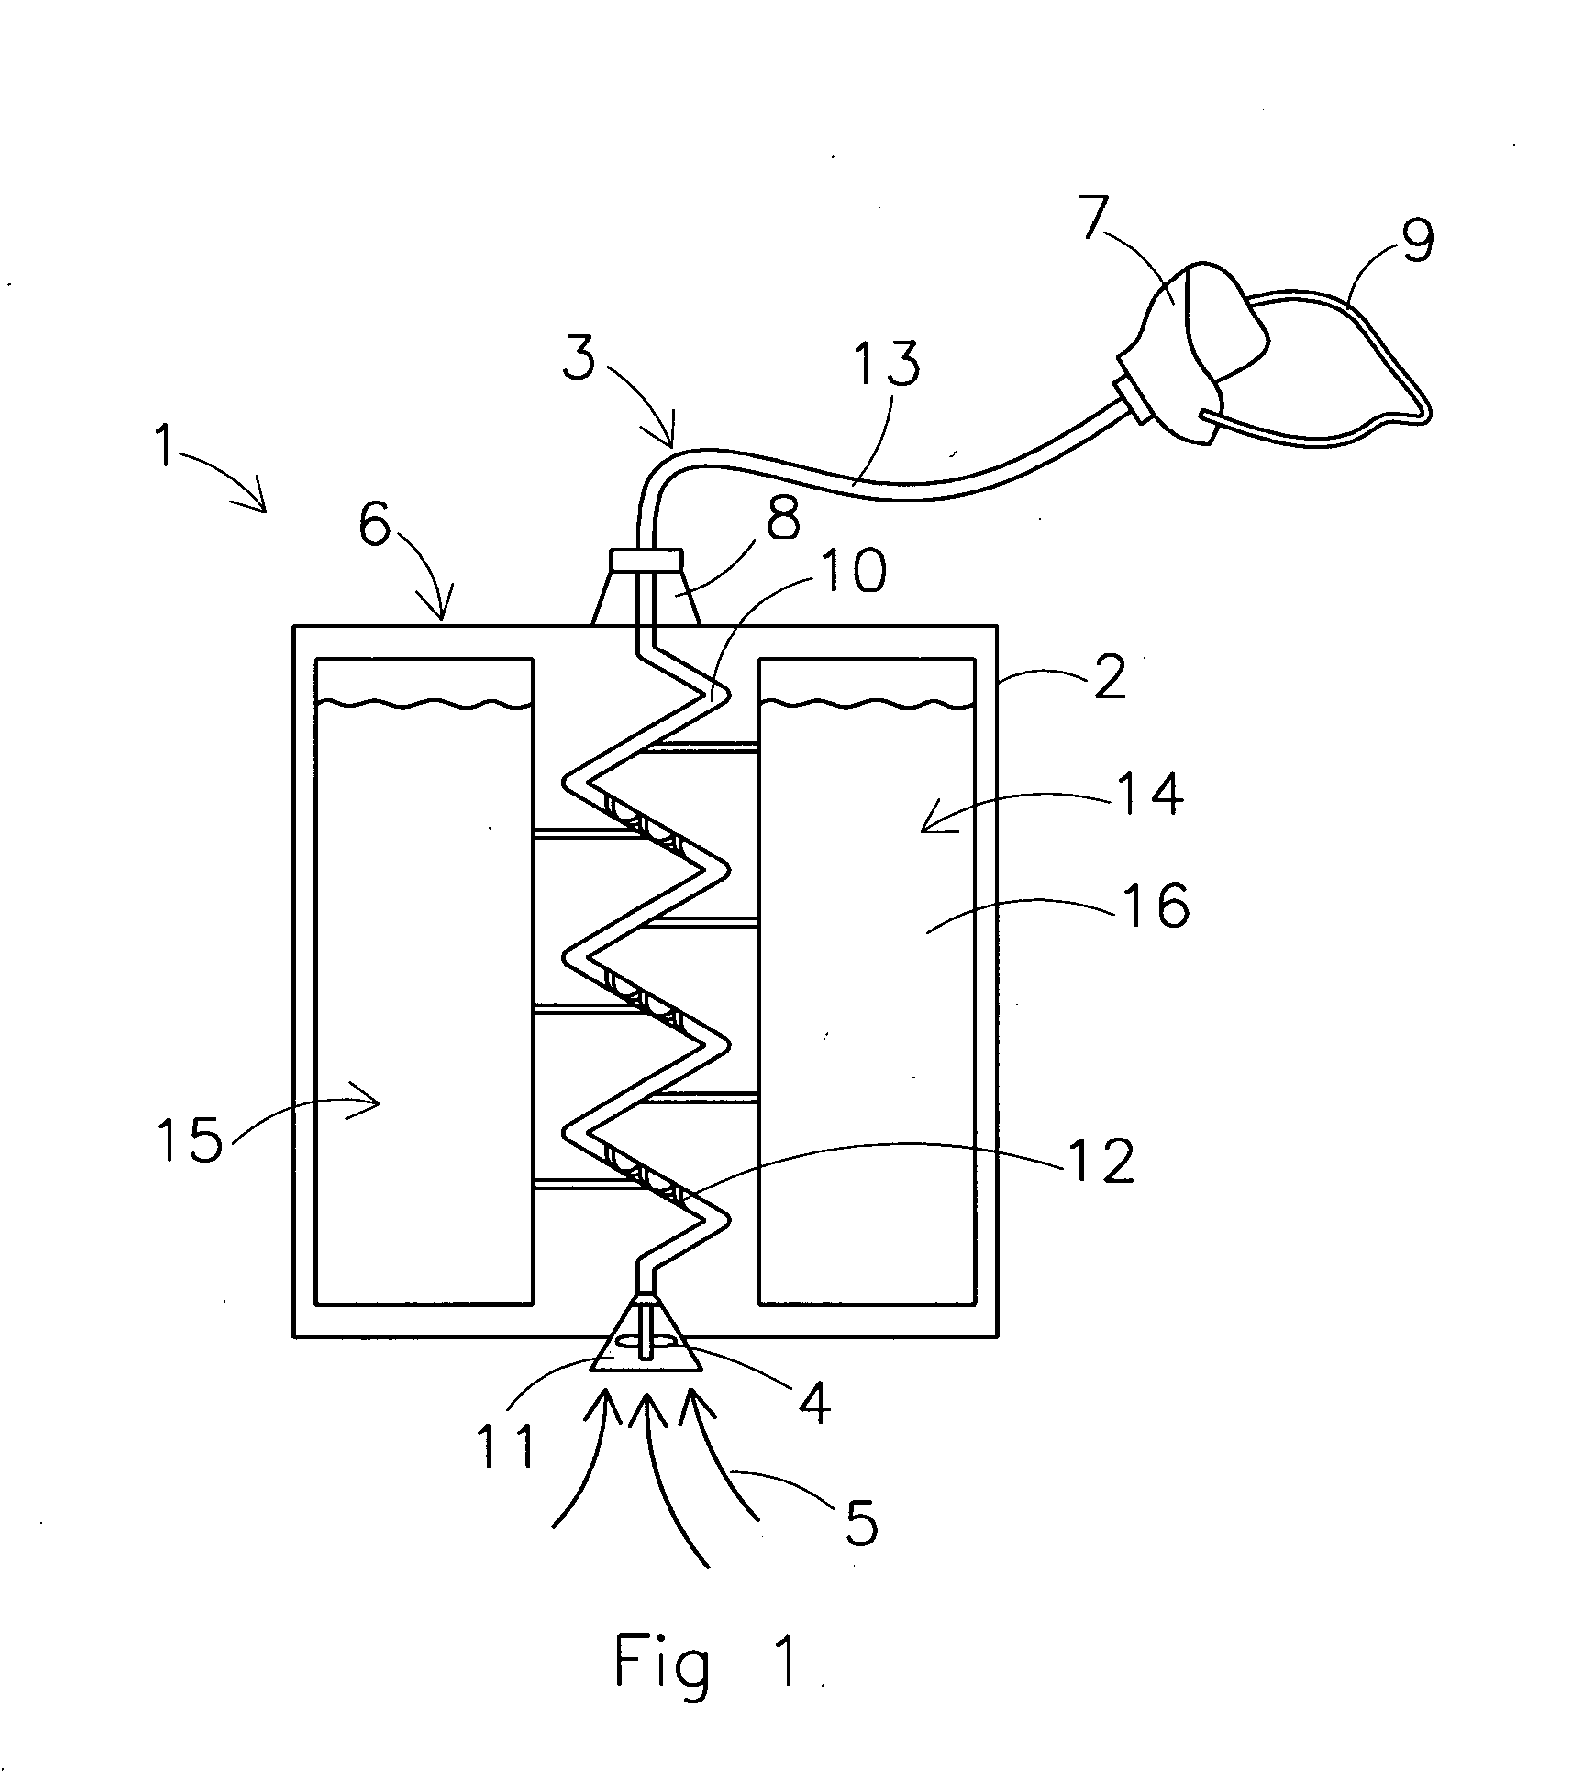 Device for providing a breathing gas